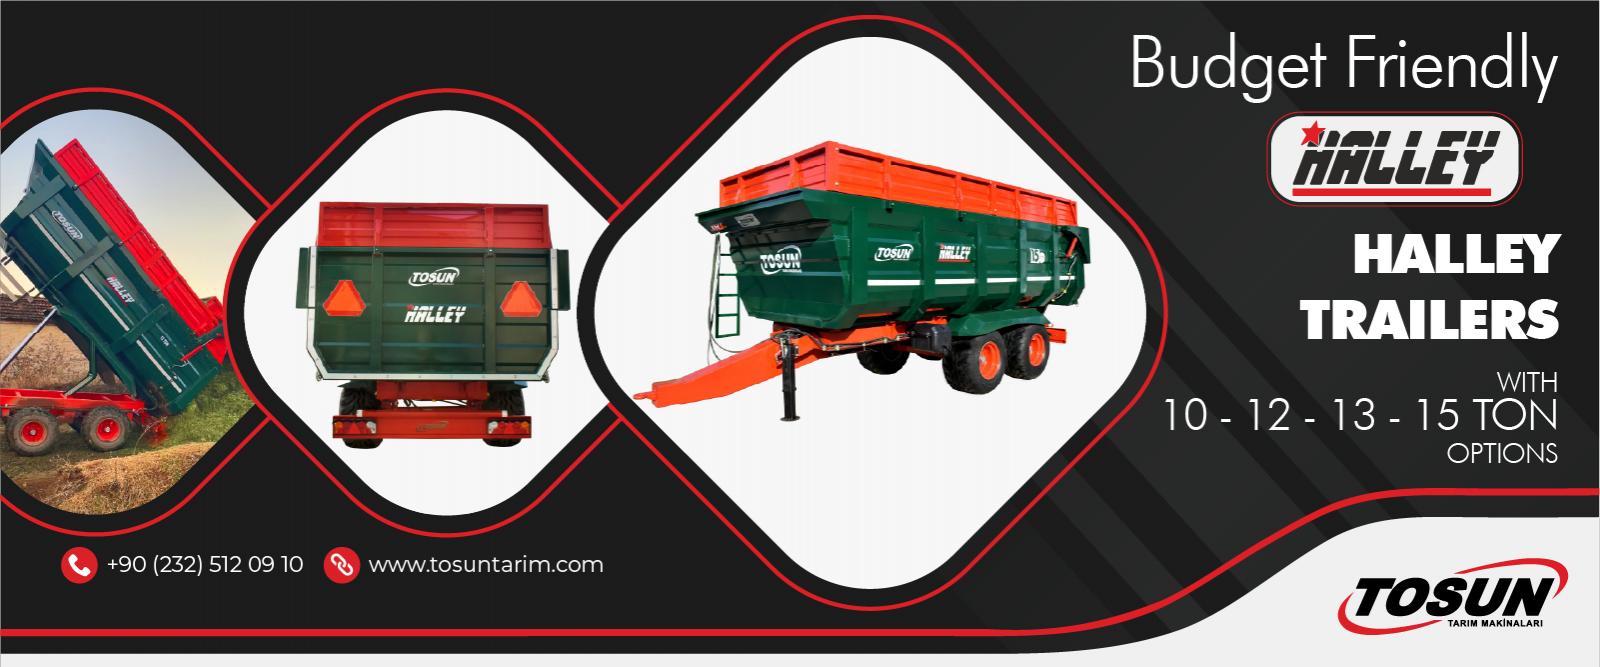 HALLEY TRAILERS